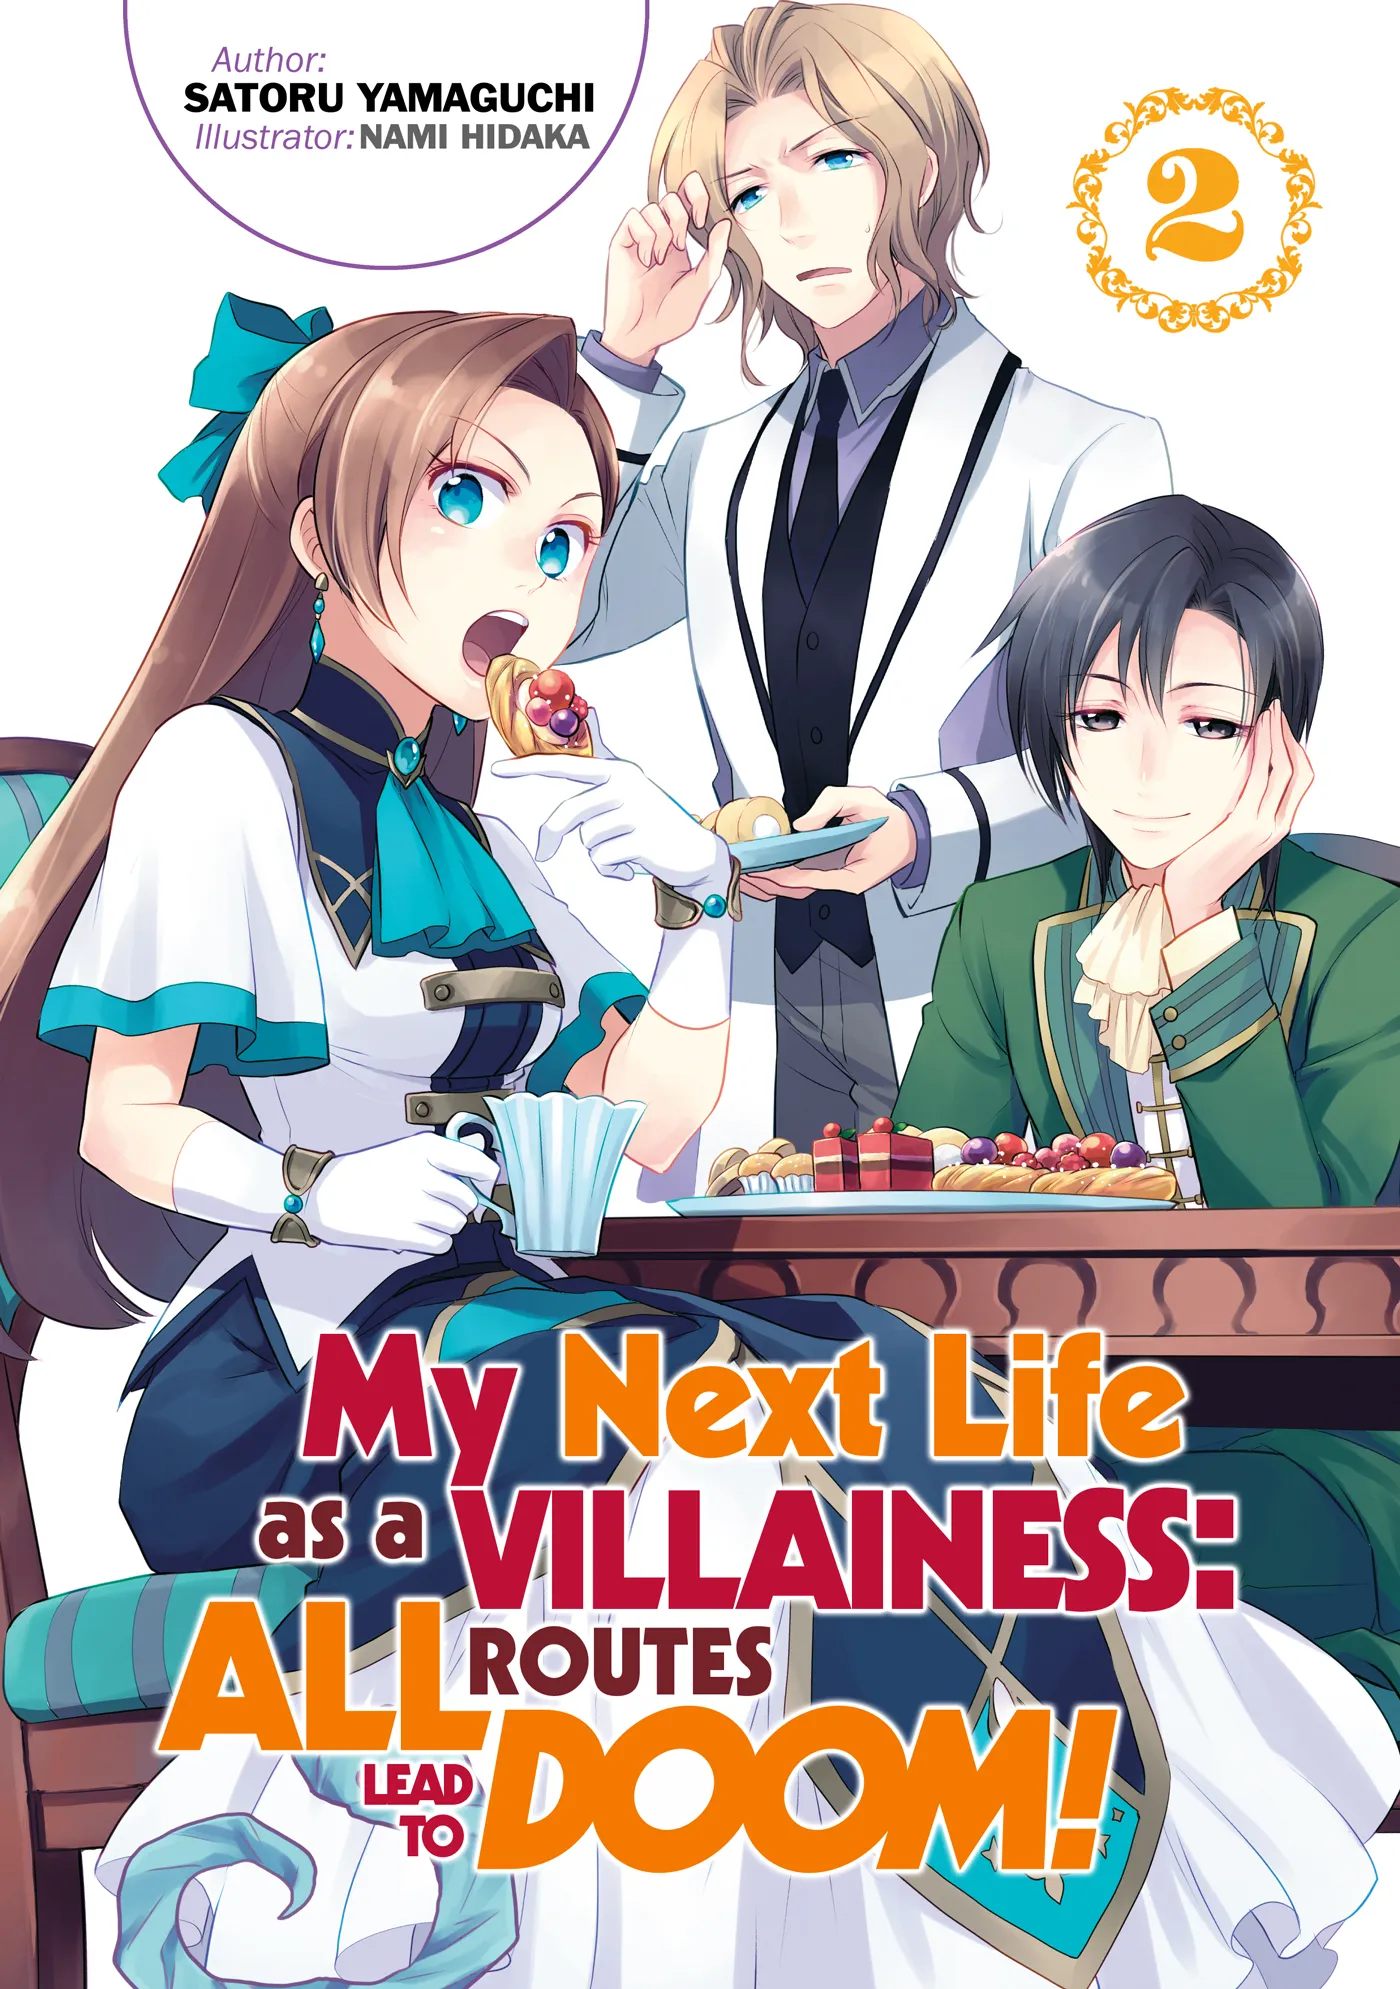 My Next Life as a Villainess: All Routes Lead to Doom! Volume 2 (My Next Life as a Villainess: All Routes Lead to Doom! #2)